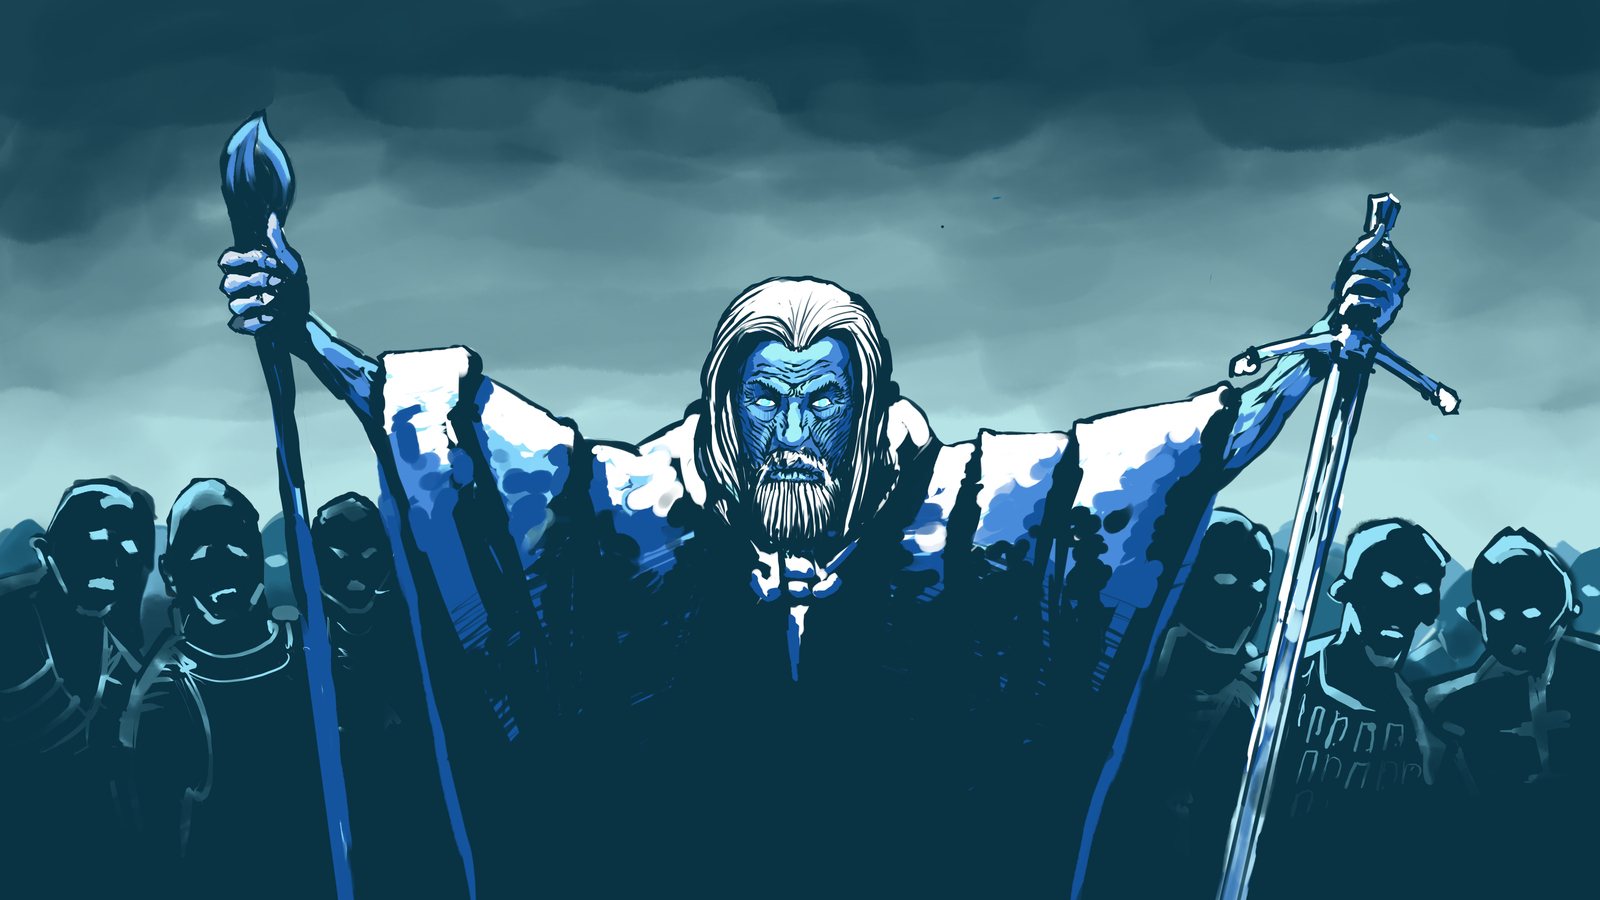 Gandalf the White... The White Walker. - My, Drawing, Art, Lord of the Rings, Game of Thrones, Photoshop, Computer graphics, Crossover, Photoshop master